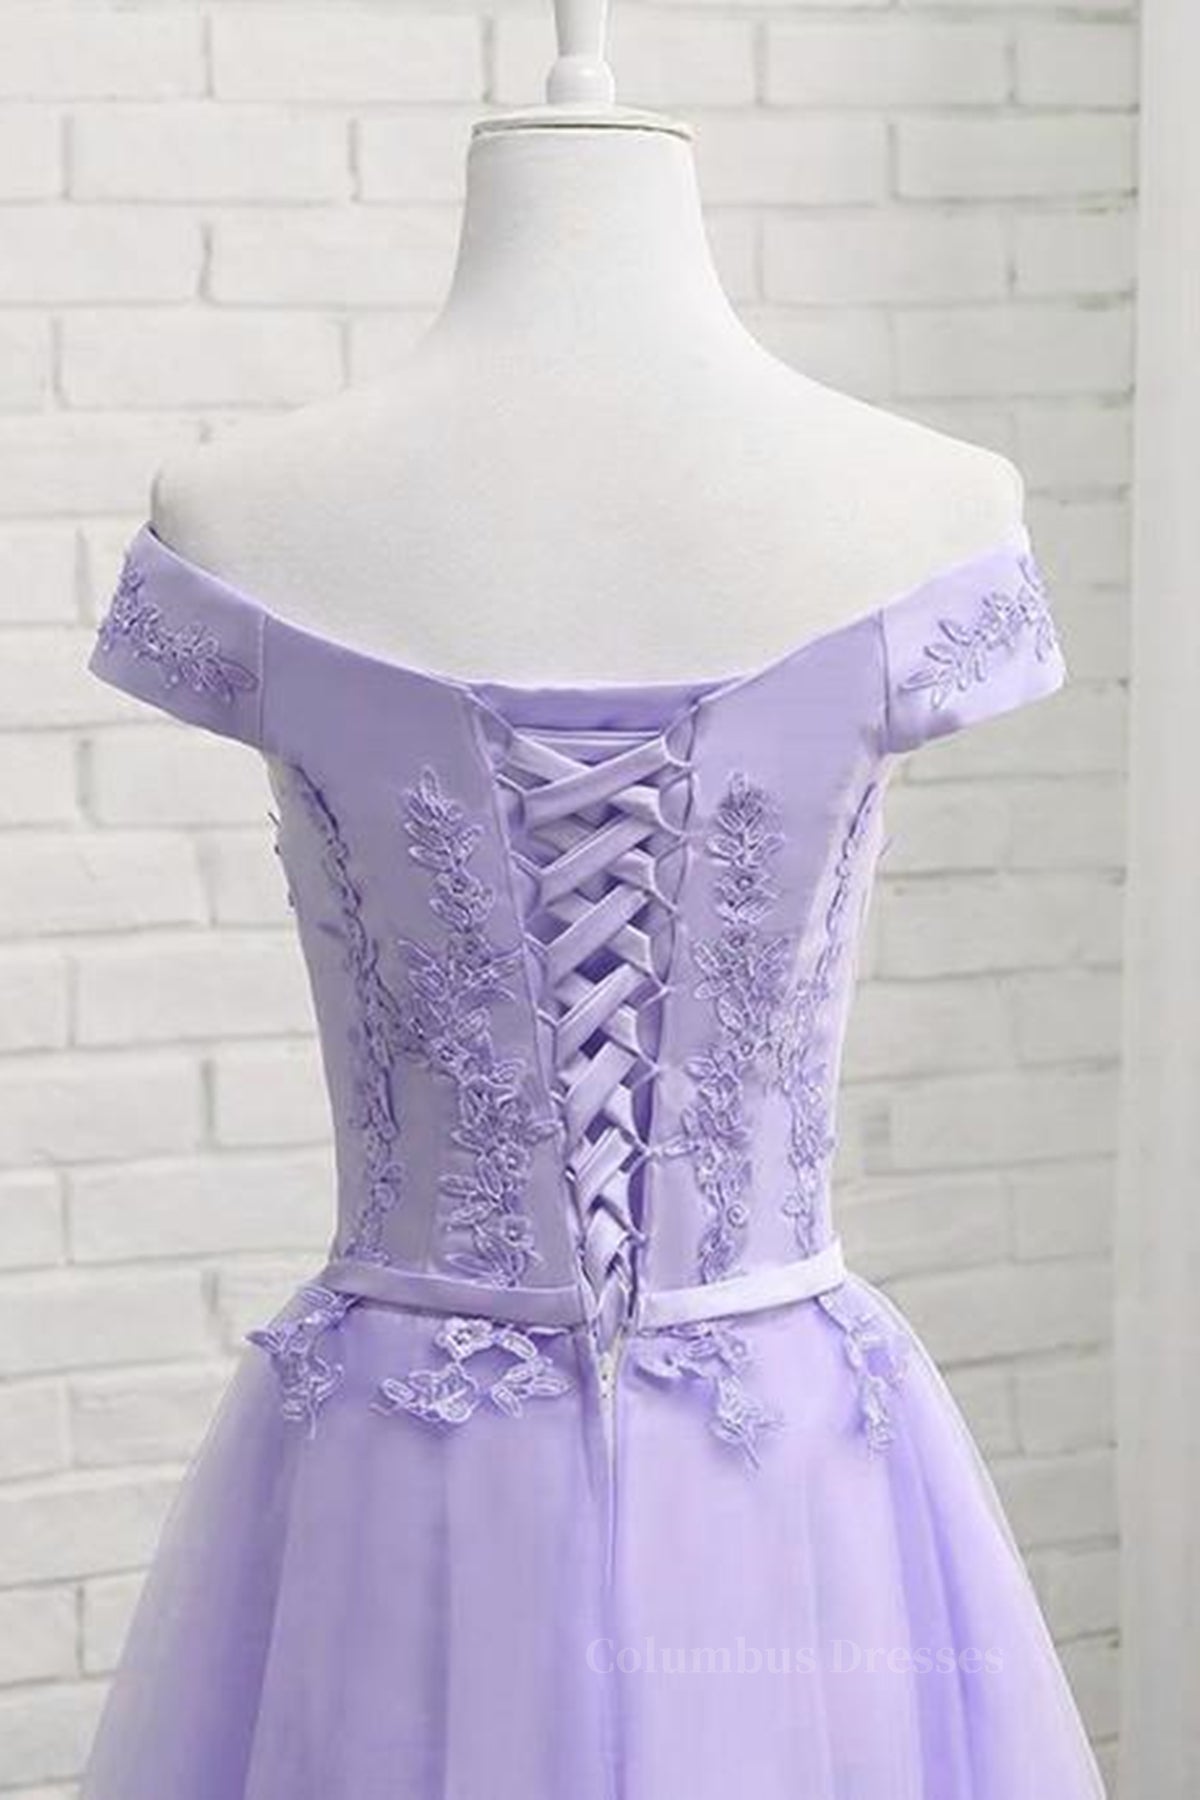 Bridesmaid Dresses With Lace, Off Shoulder Purple Lace Short Prom Dress, Lilac Lace Homecoming Dress, Short Purple Formal Evening Dress